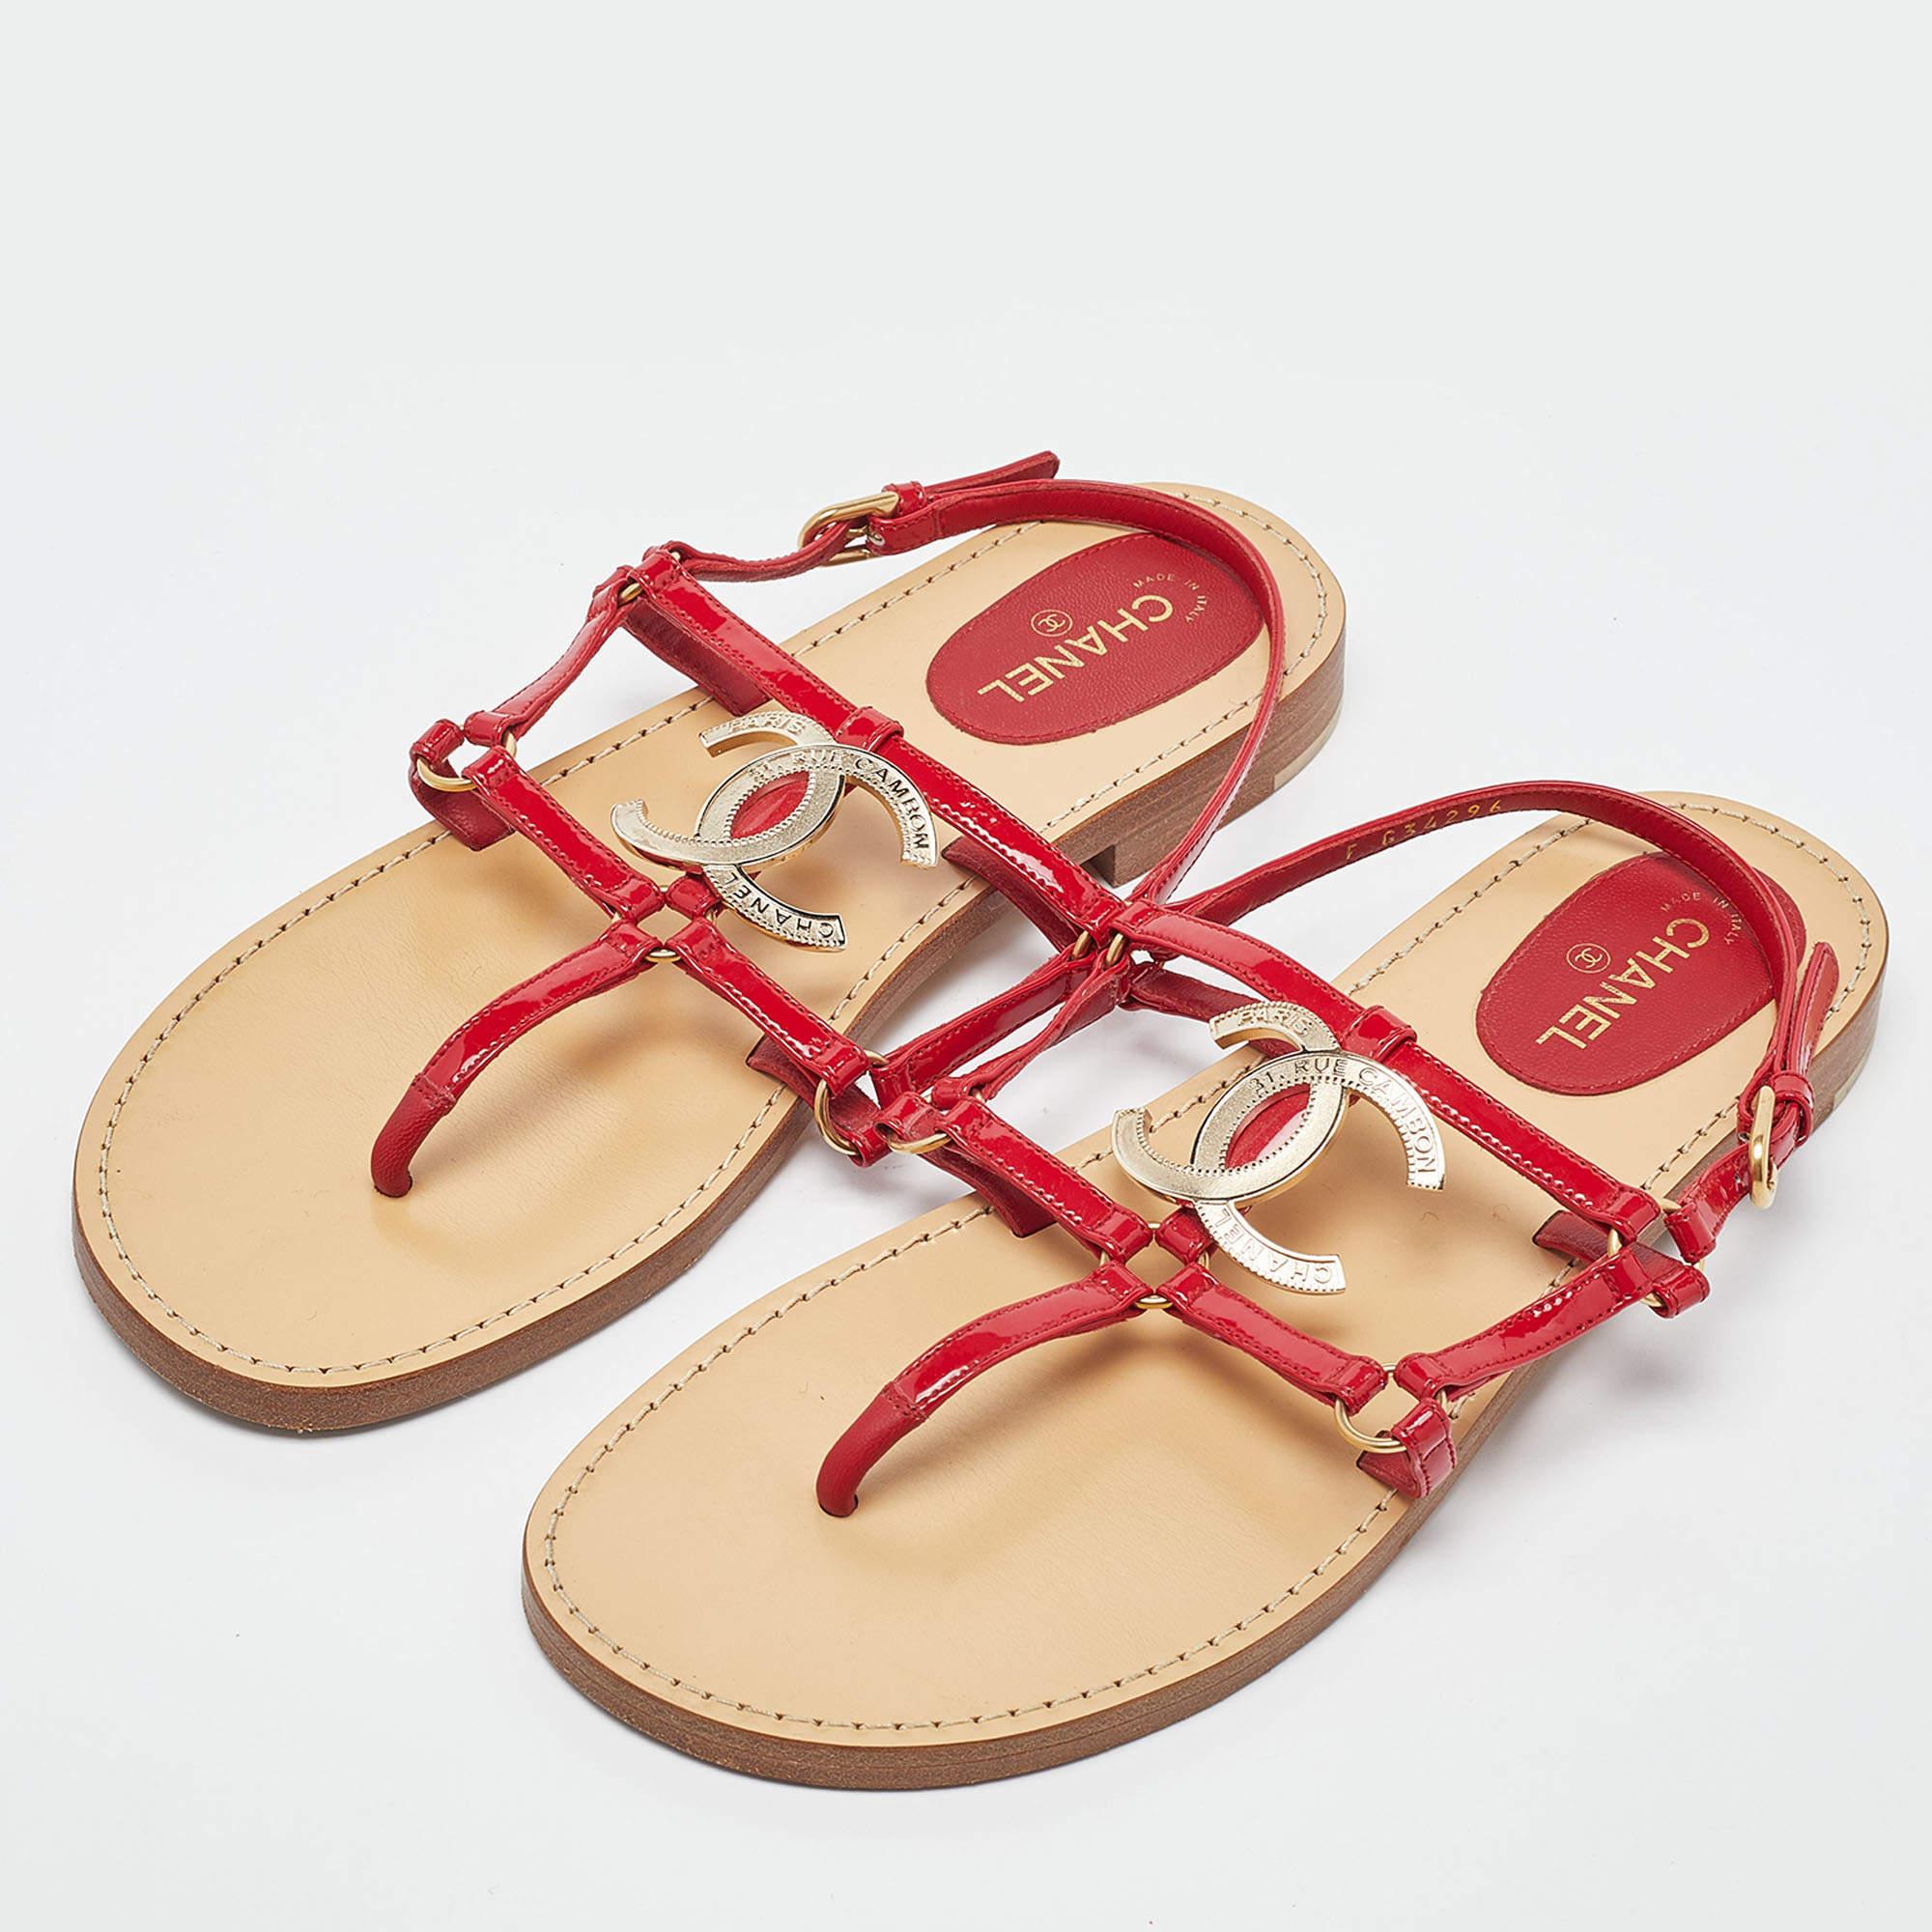 These sandals are chic and constructed with care for a great fit. Crafted from quality materials, they are durable, easy to style, and fabulous, with comfortable interiors, artful designing, and beautiful uppers.

